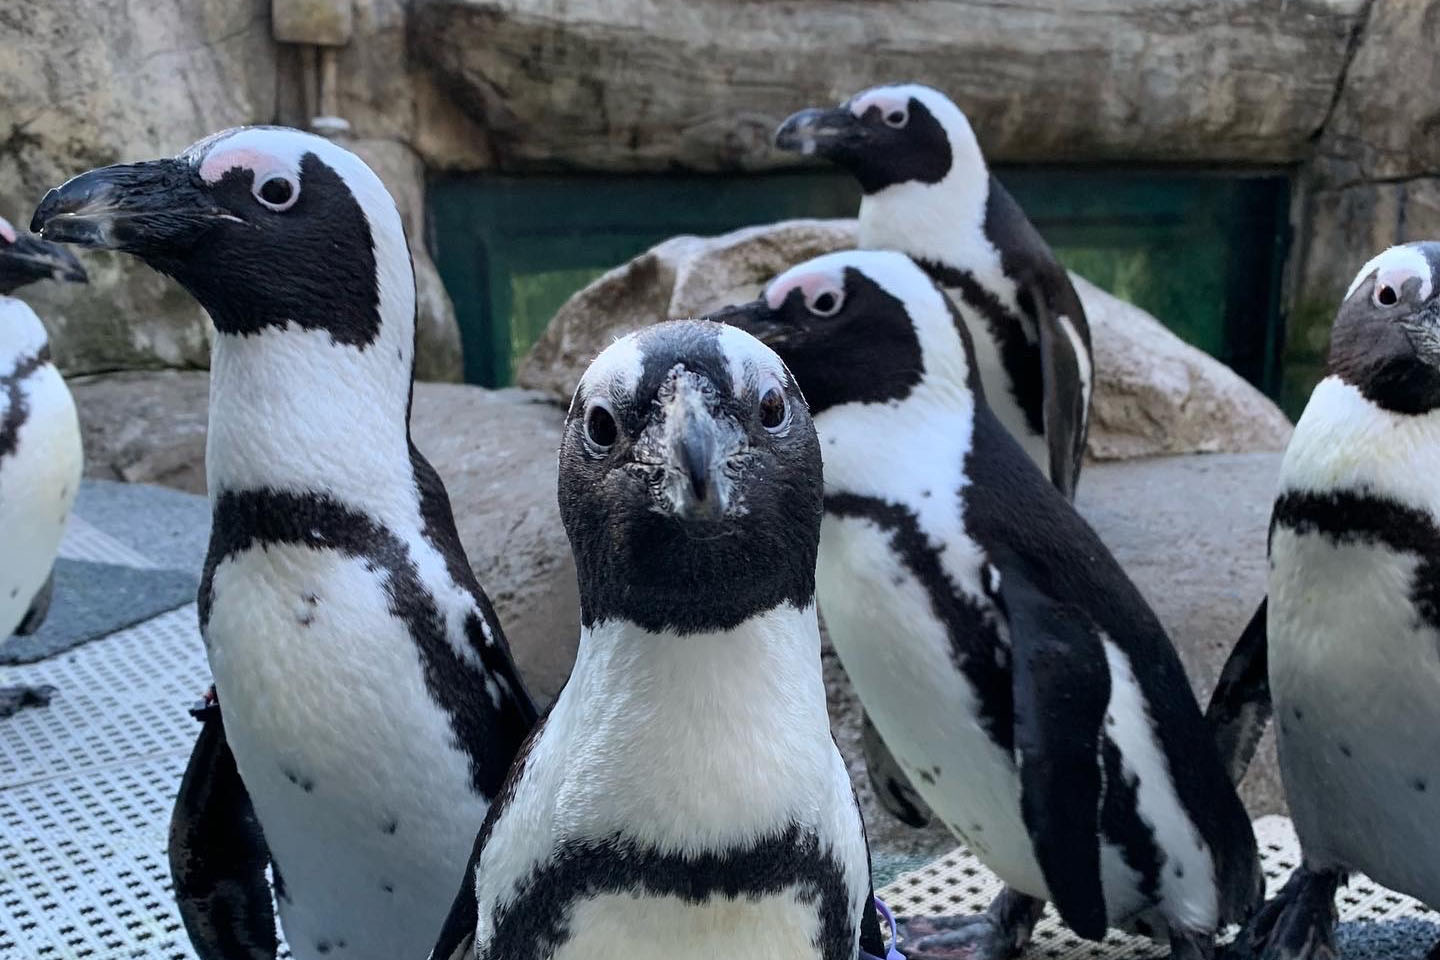 group of penguins; one staring at the camera